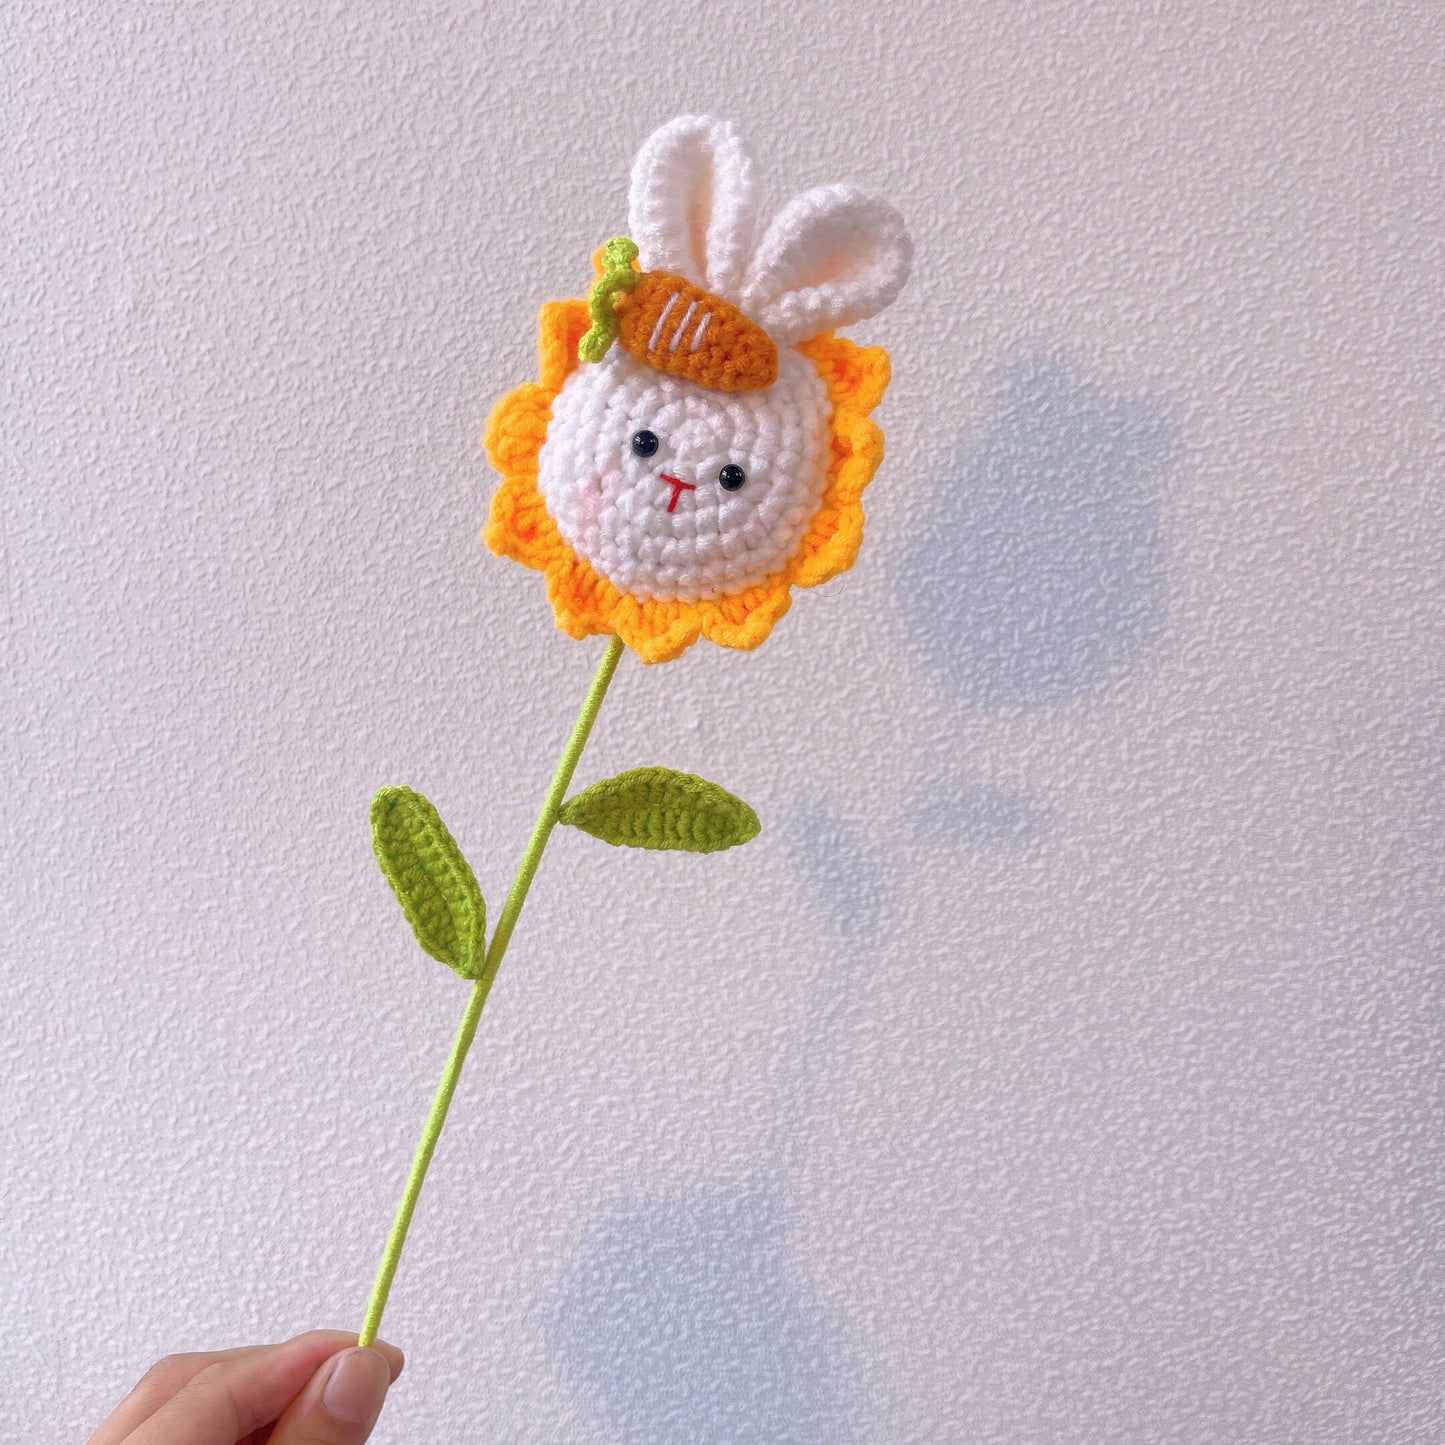 Playful Crochet Decorative Plant Pals - Gift for Plant Lovers, Adorable Decor, Gift for Birthday, Handmade Crochet, Decorative Plant Markers